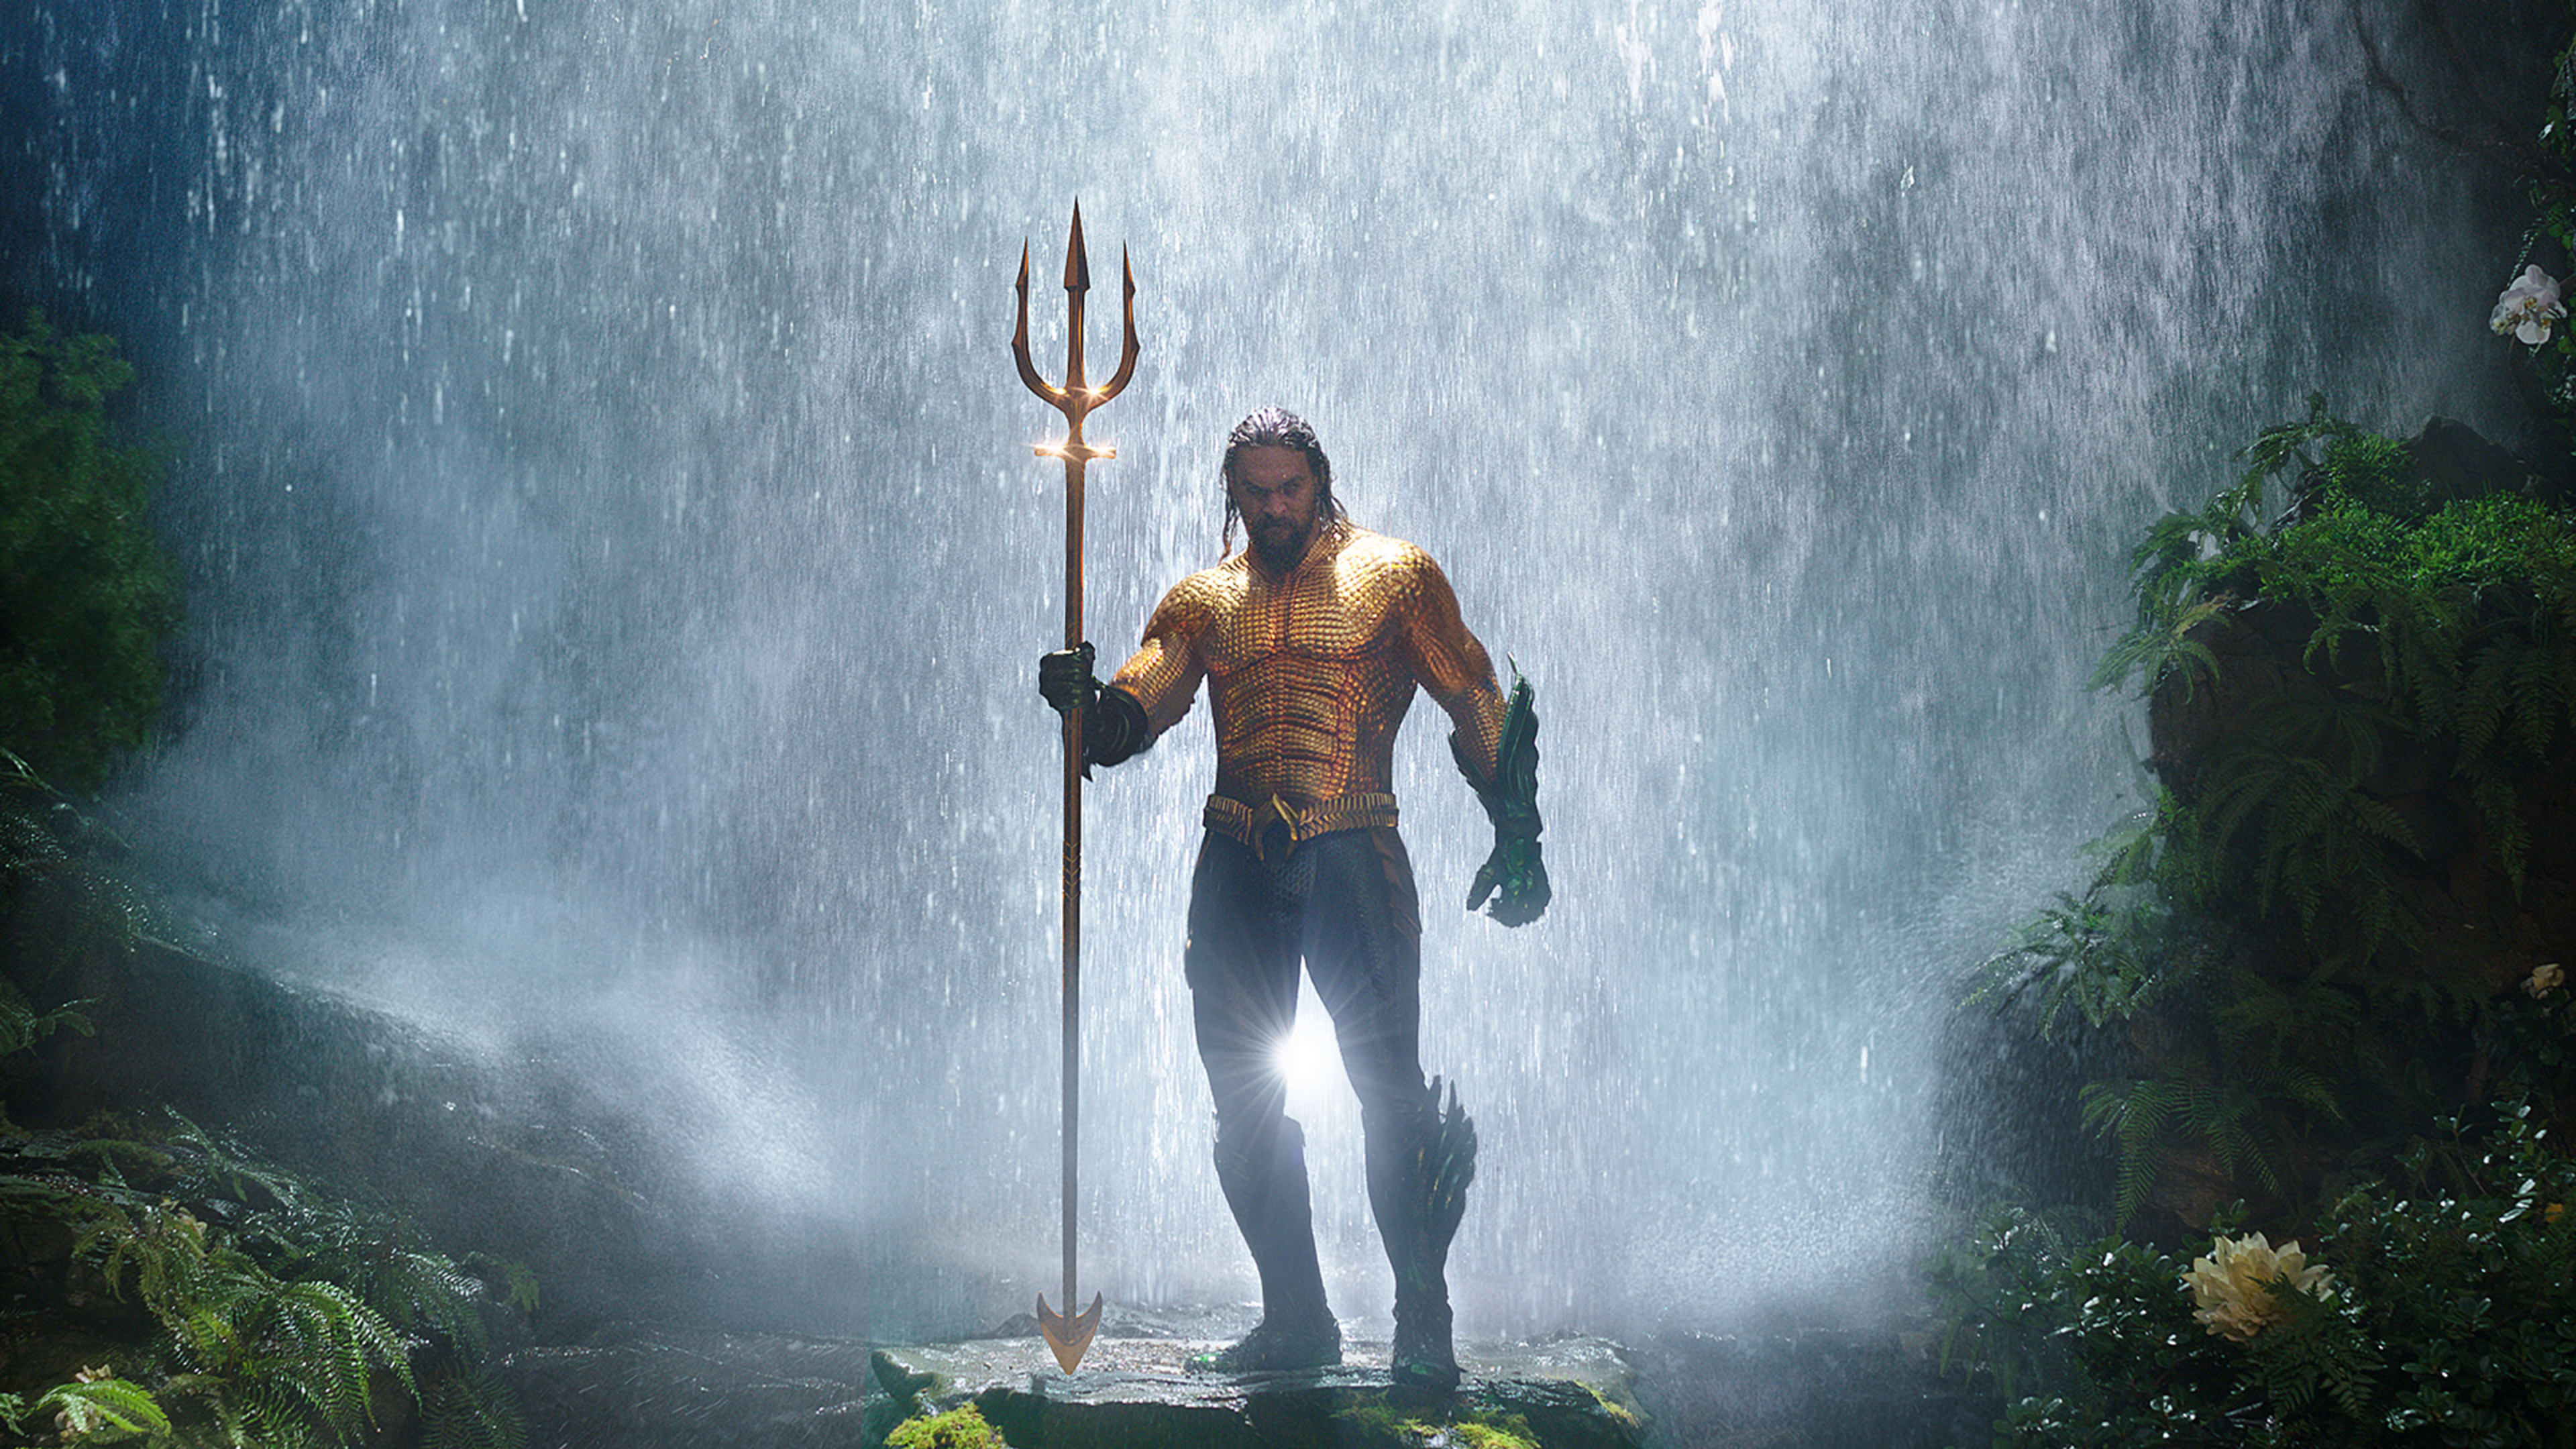 Amazon Prime members will be able to watch Aquaman in cinemas a week early